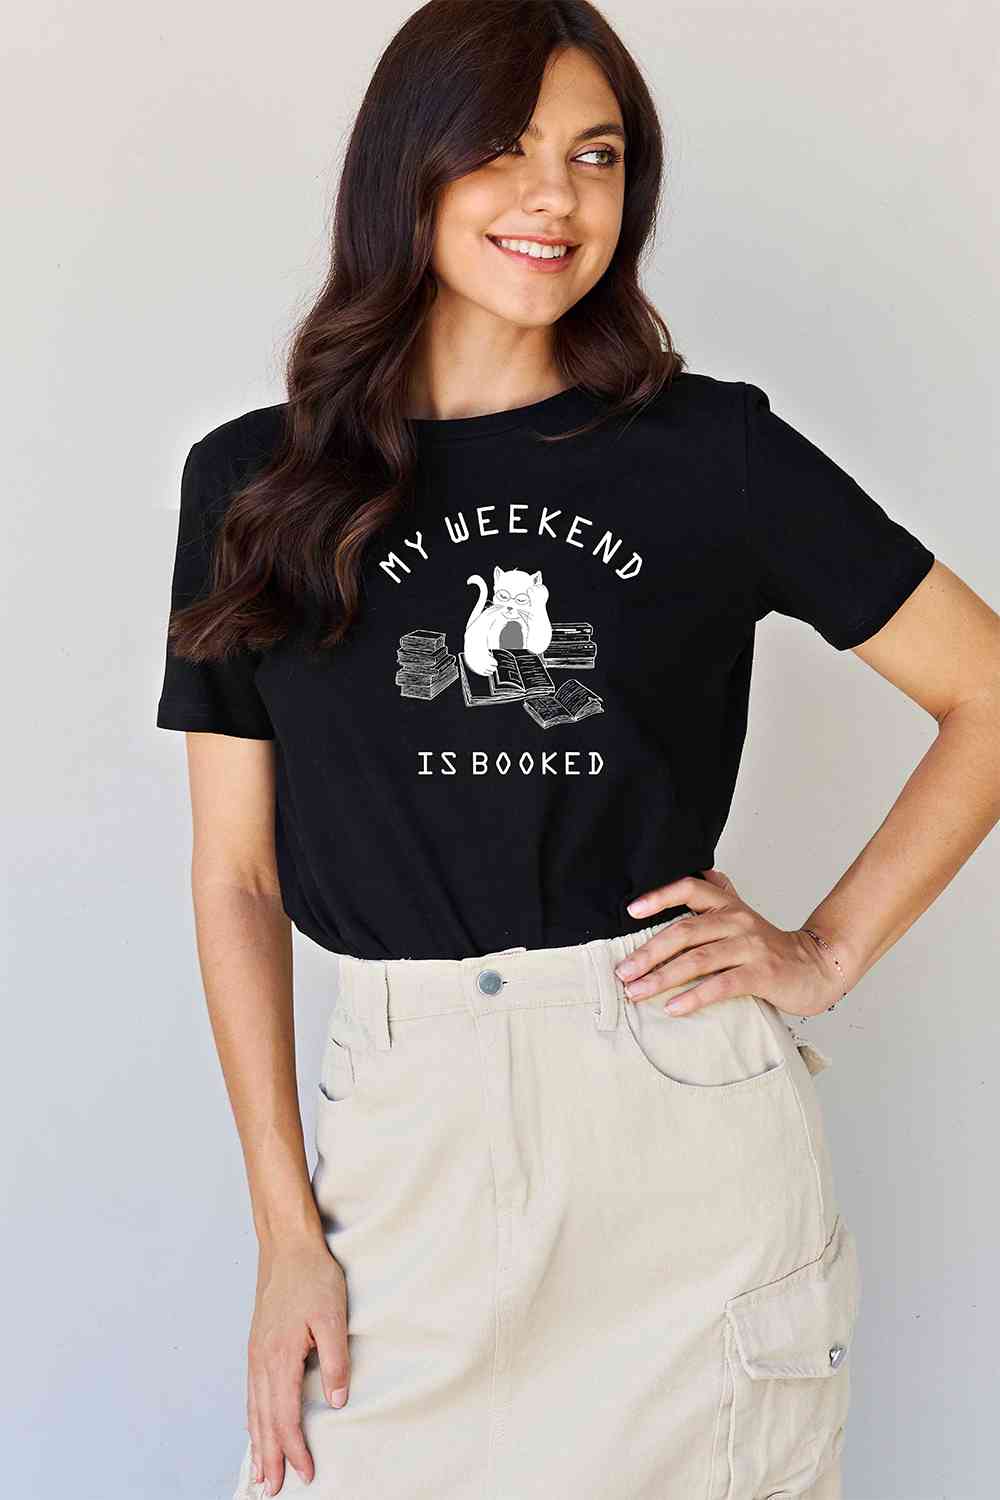 MY WEEKEND IS BOOKED TEE – Purr-fectly Cozy and Cat-tastically Cute!